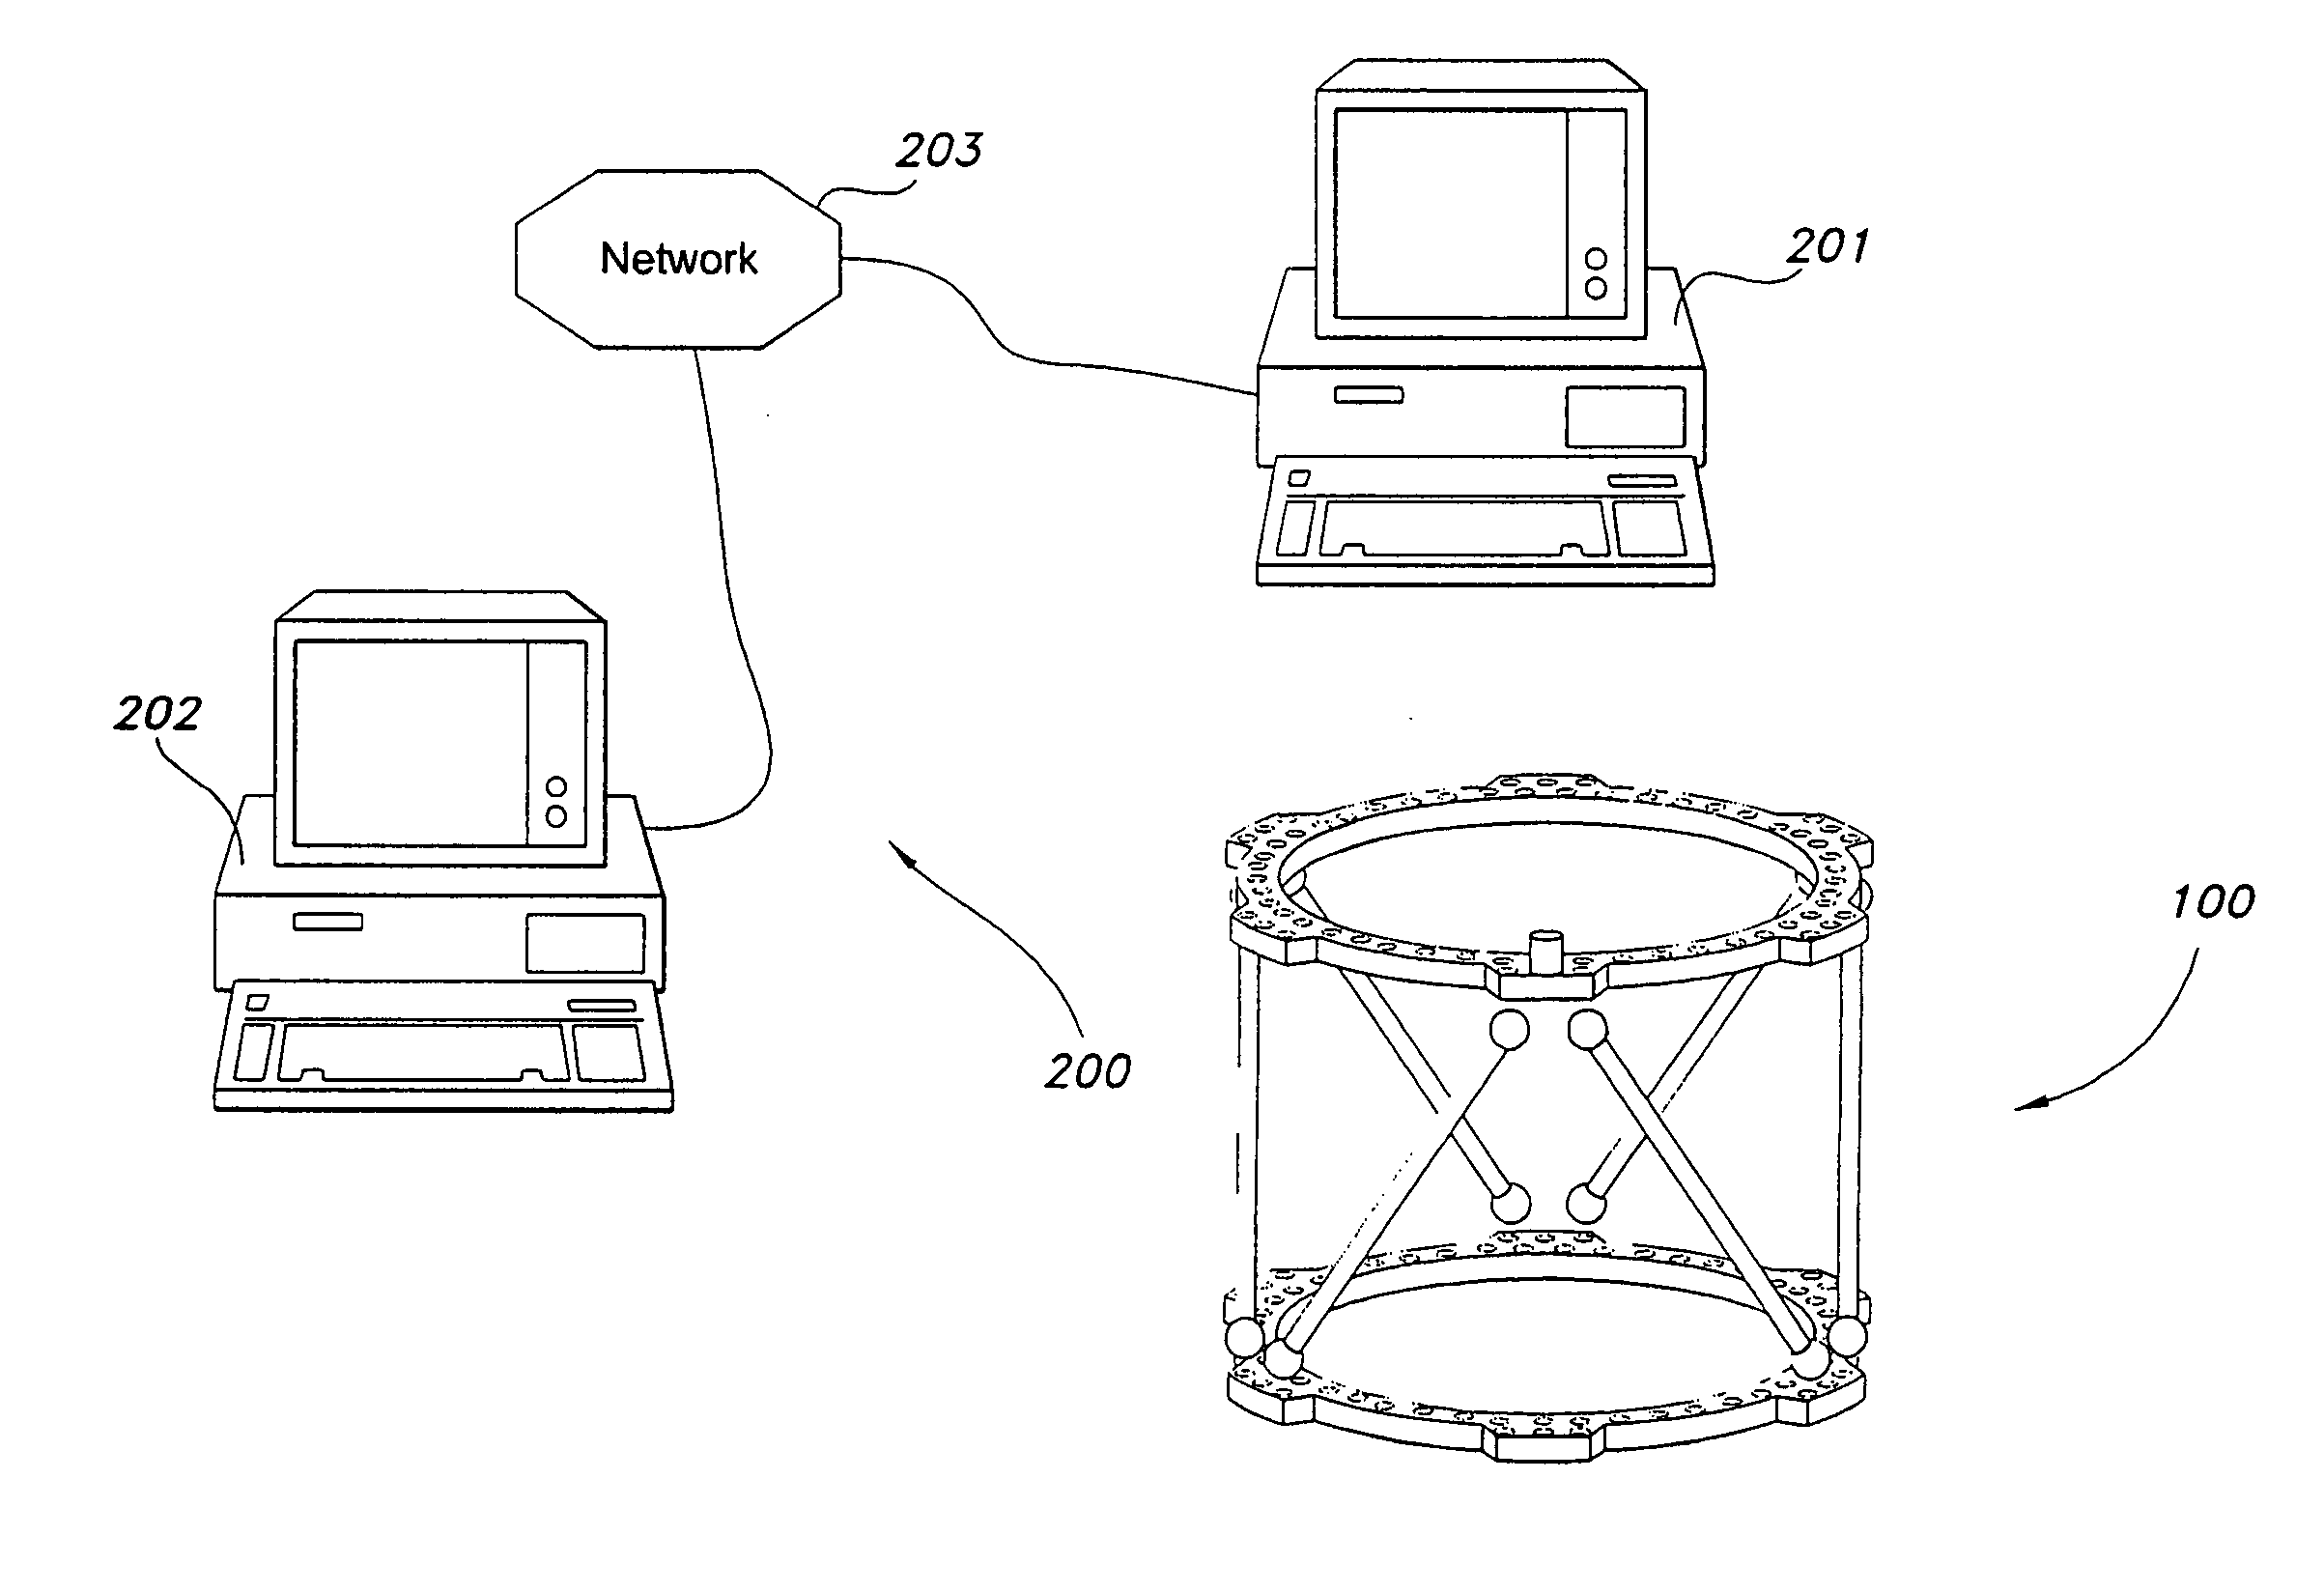 Orthopaedic fixation method and device with delivery and presentation features